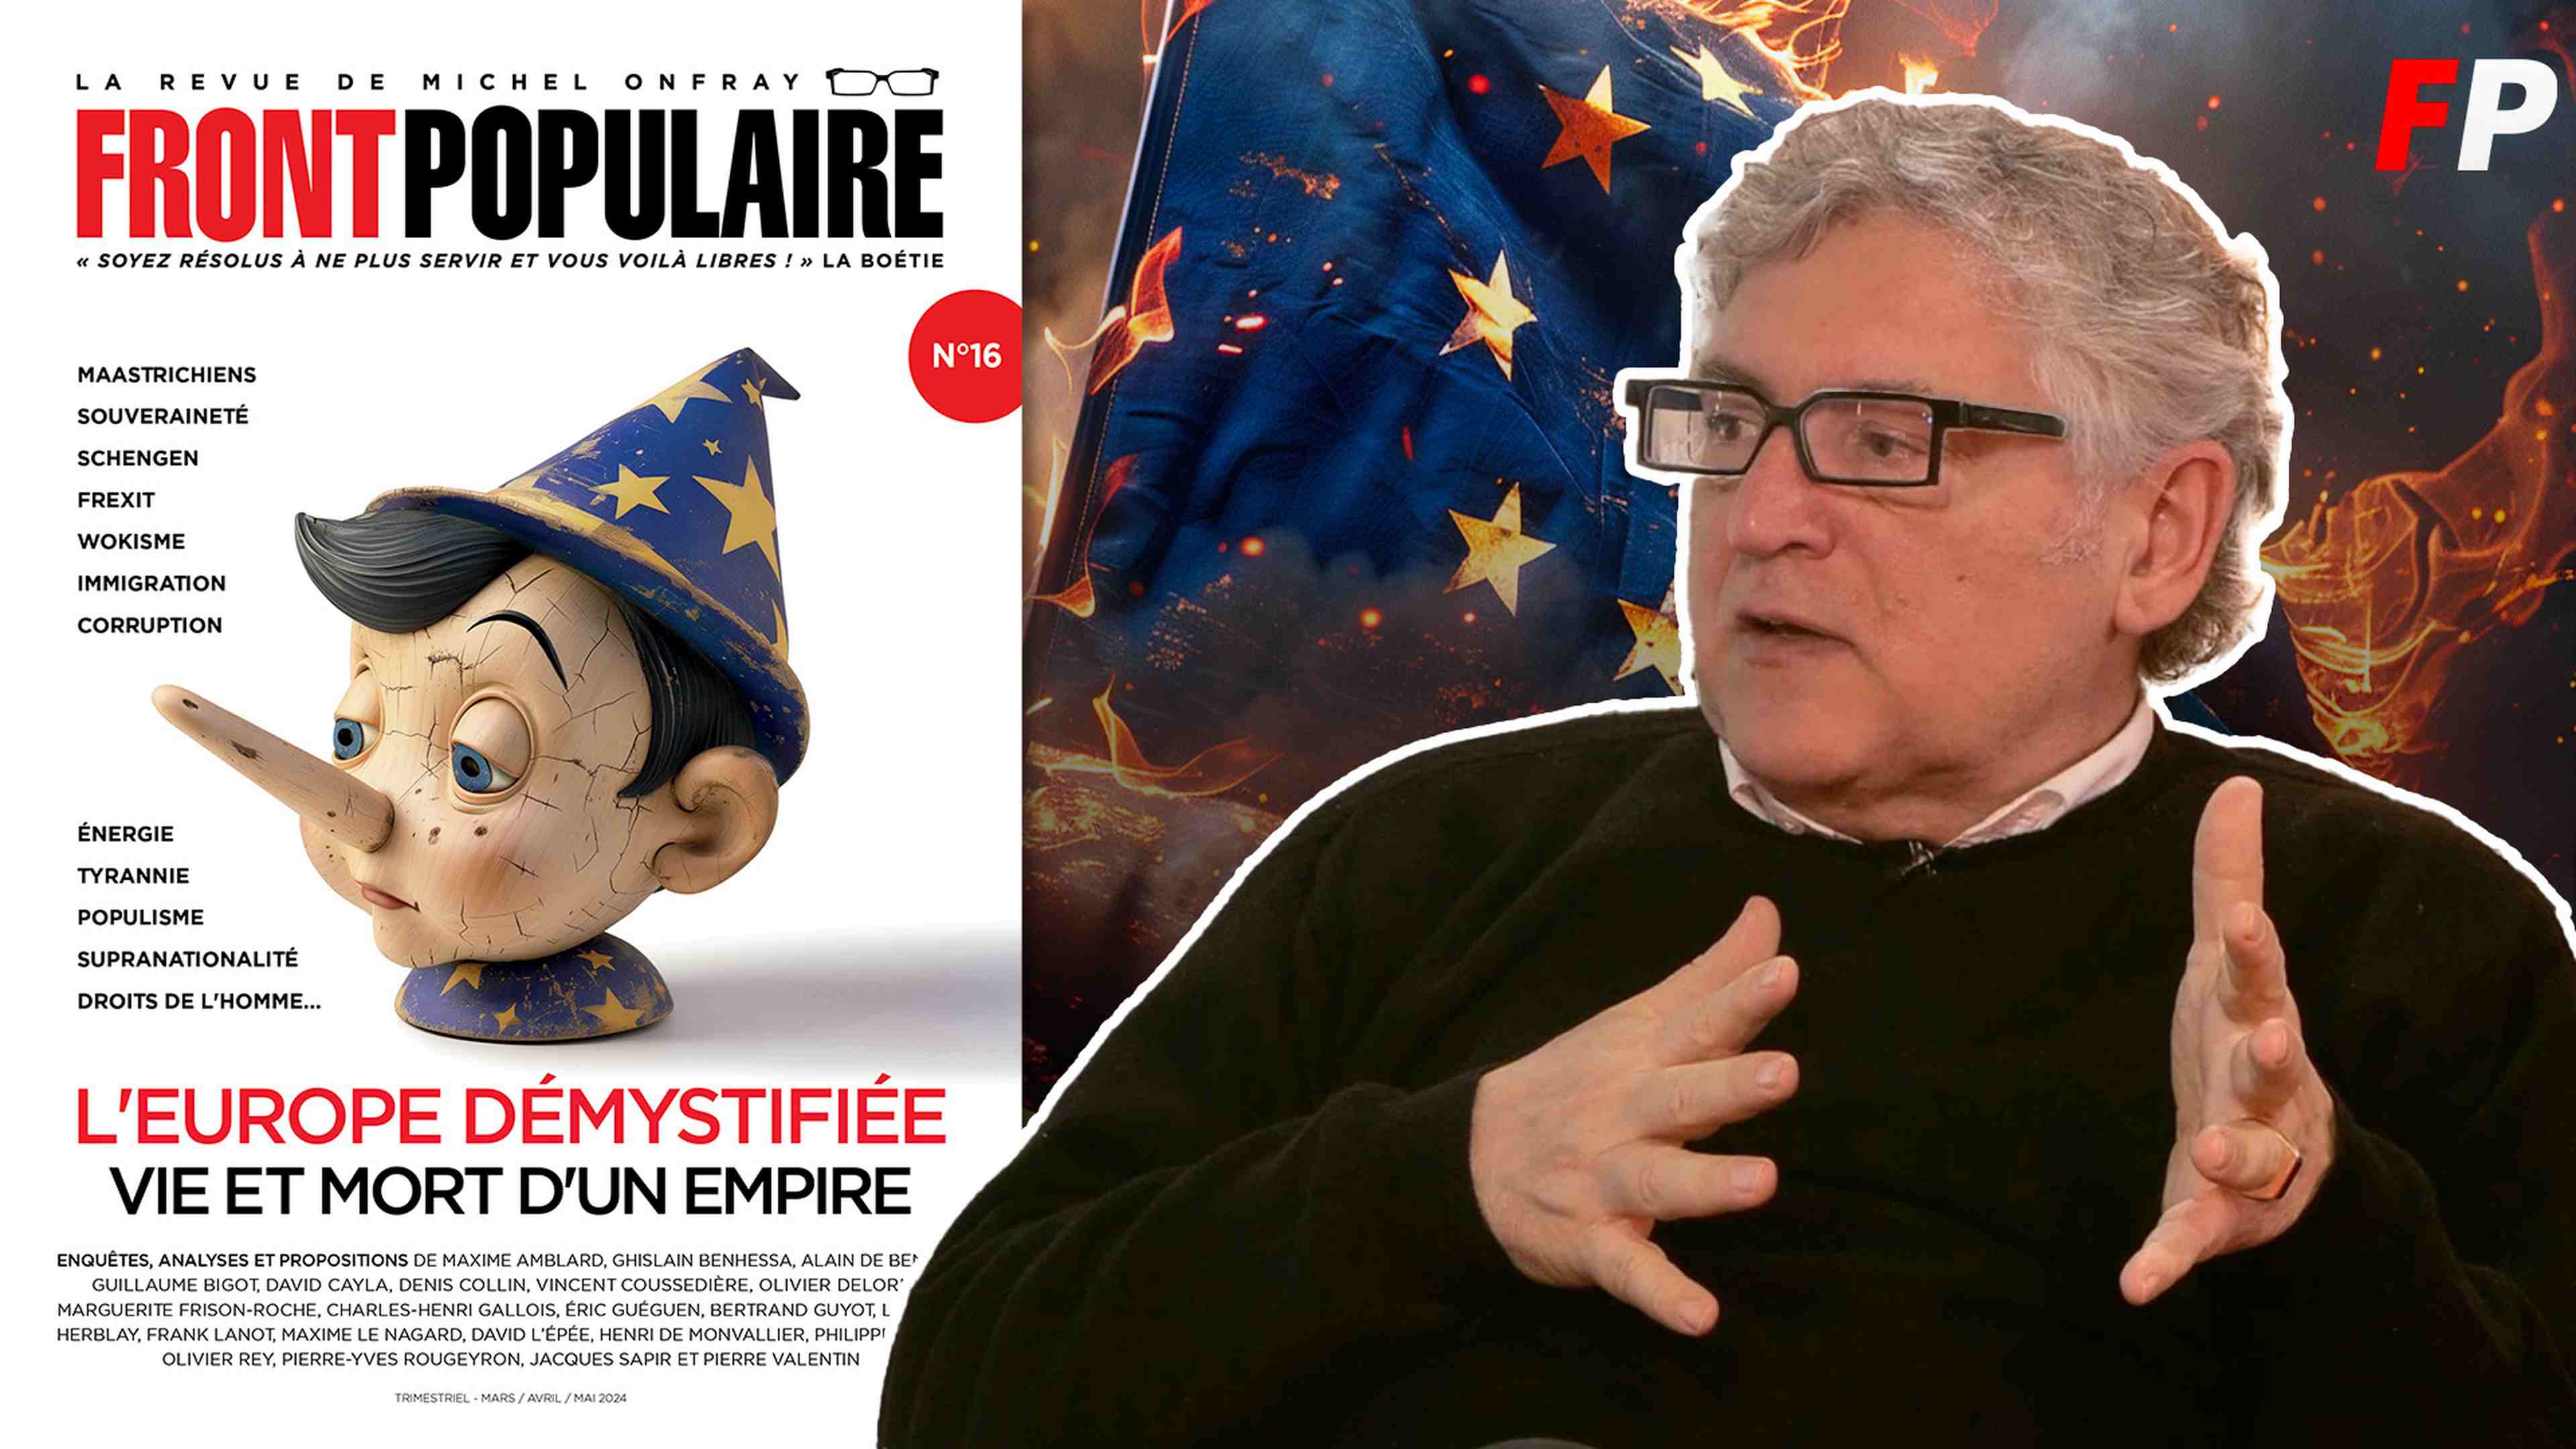 michel-onfray-europe-front-populaire-numero-16